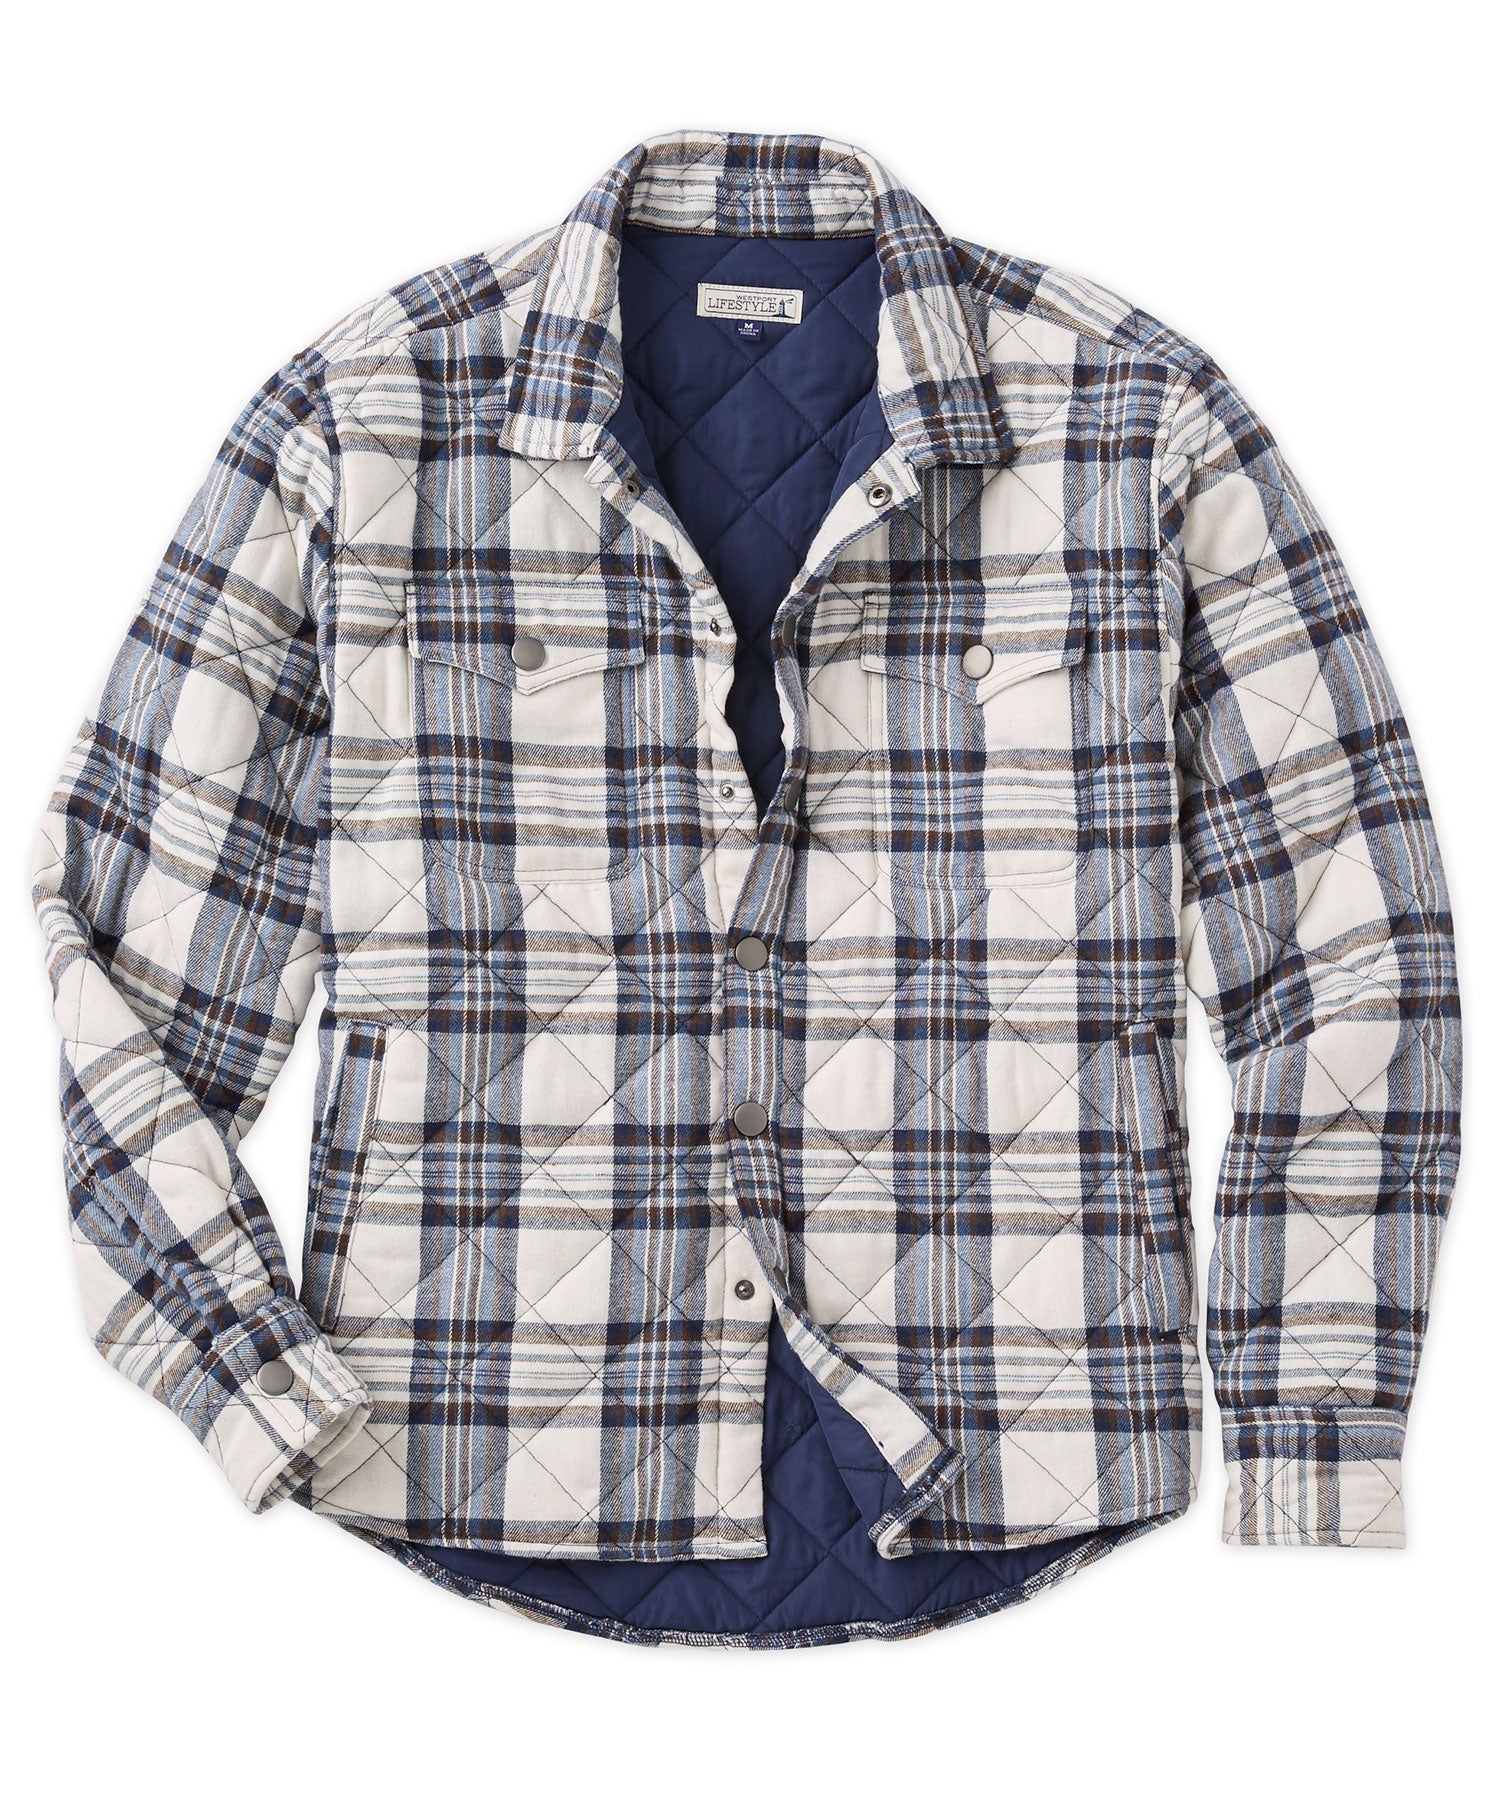 Giacca camicia in flanella scozzese Westport Lifestyle Firepit, Men's Big & Tall